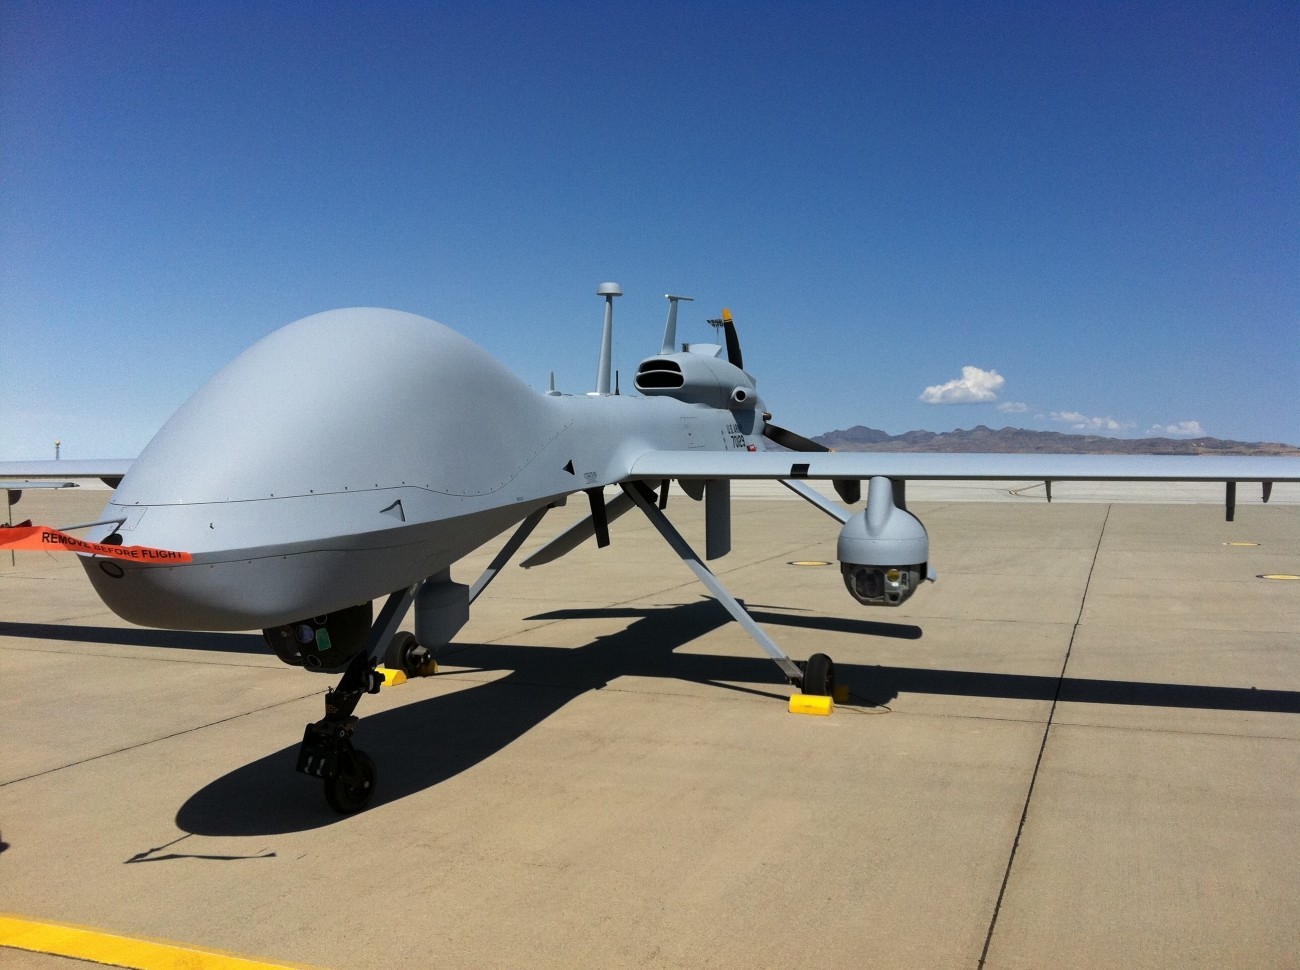 41929_01_army-building-airport-fort-bliss-drones_full.jpg